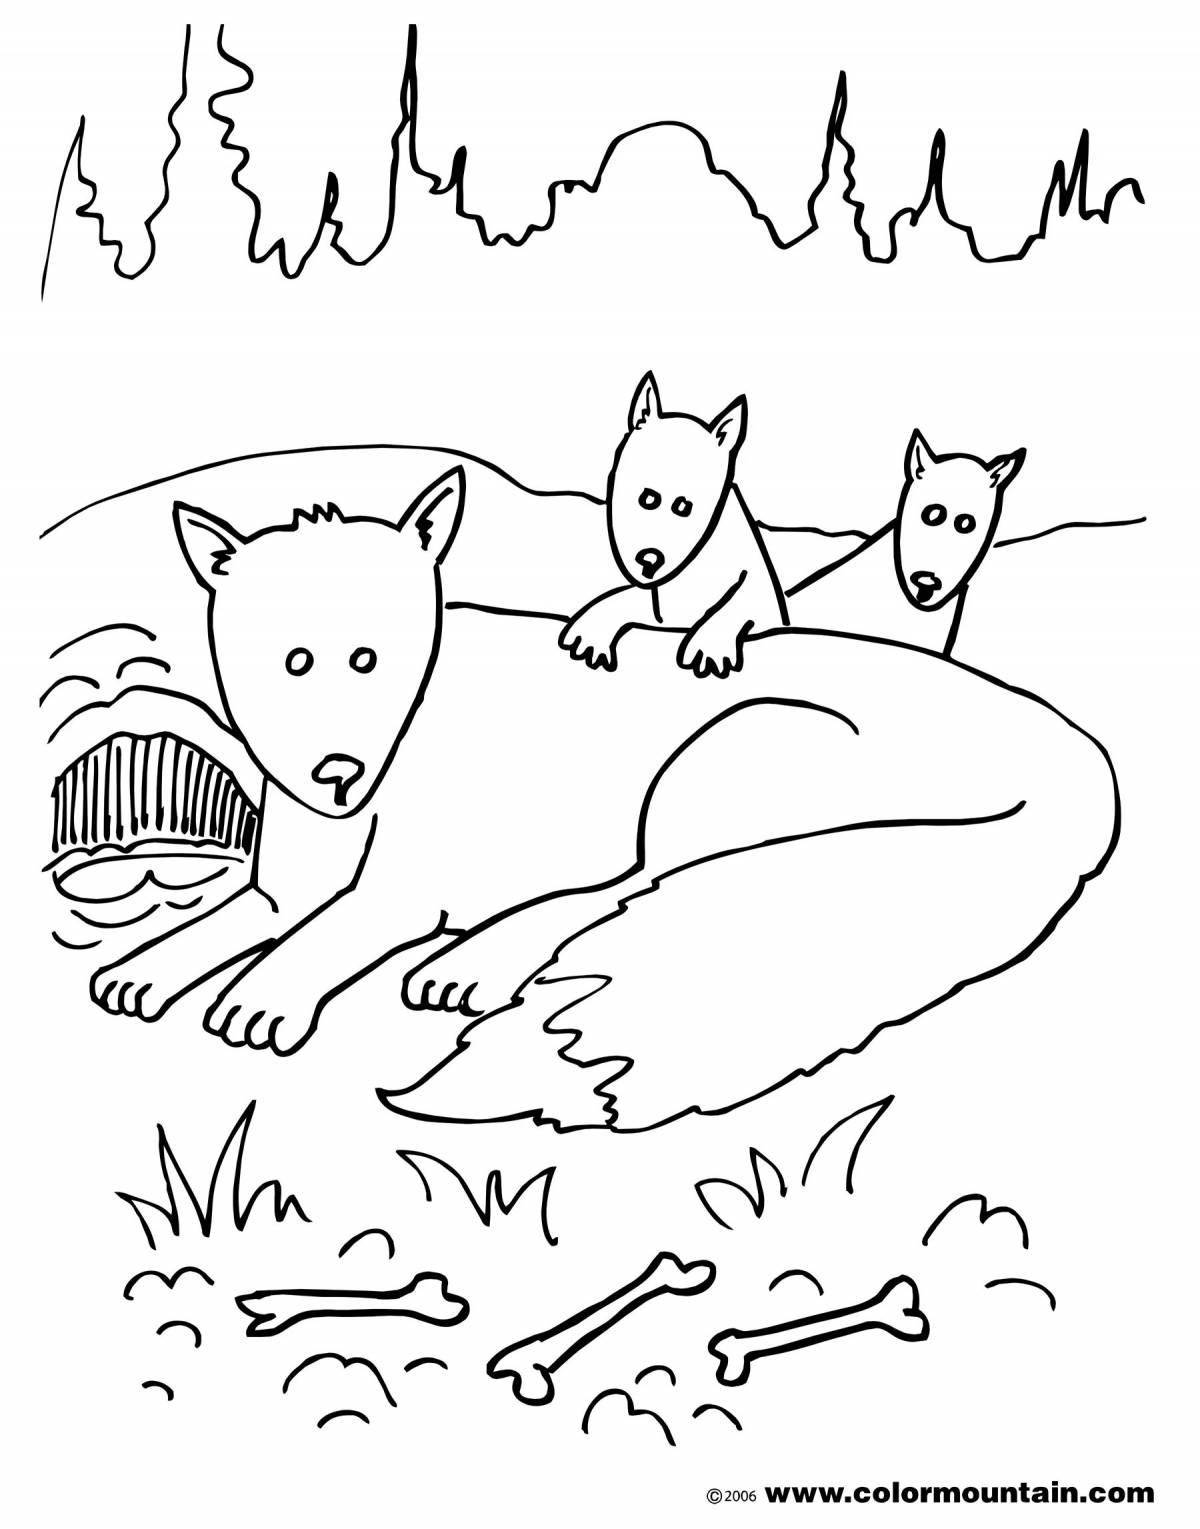 Naughty fox and mouse coloring page